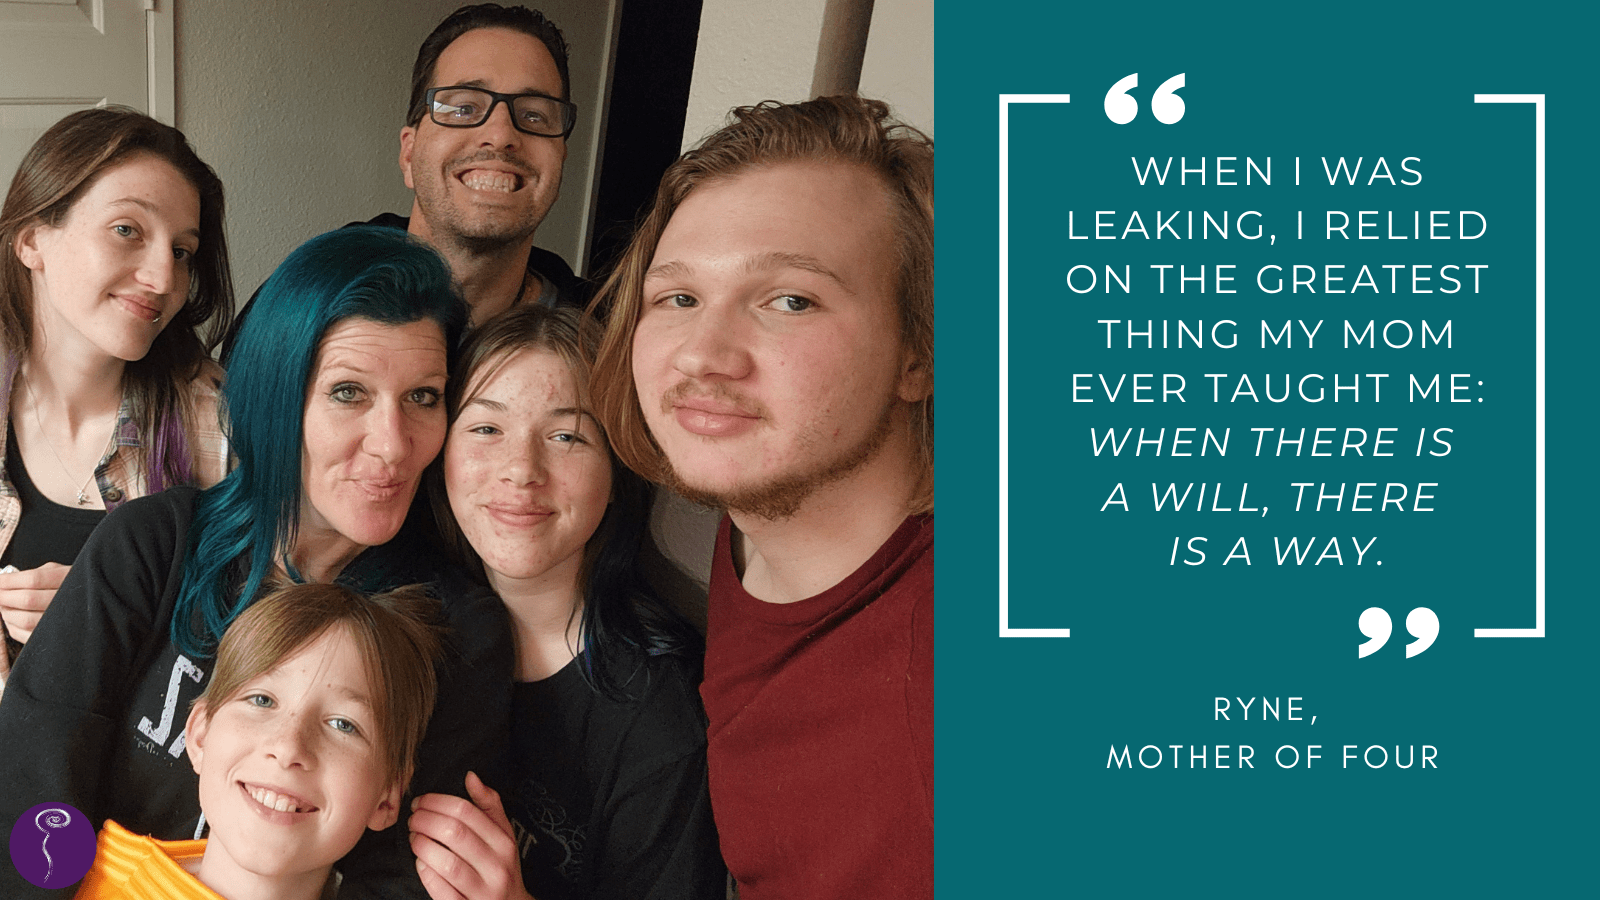 A photo of Ryne, with shining turquoise green hair, surrounded by her family of four smiling teenaged kids and her partner, with a quote that reads, "When I was leaking, I relied on the greatest thing my mom ever taught me: When there is a will, there is a way."